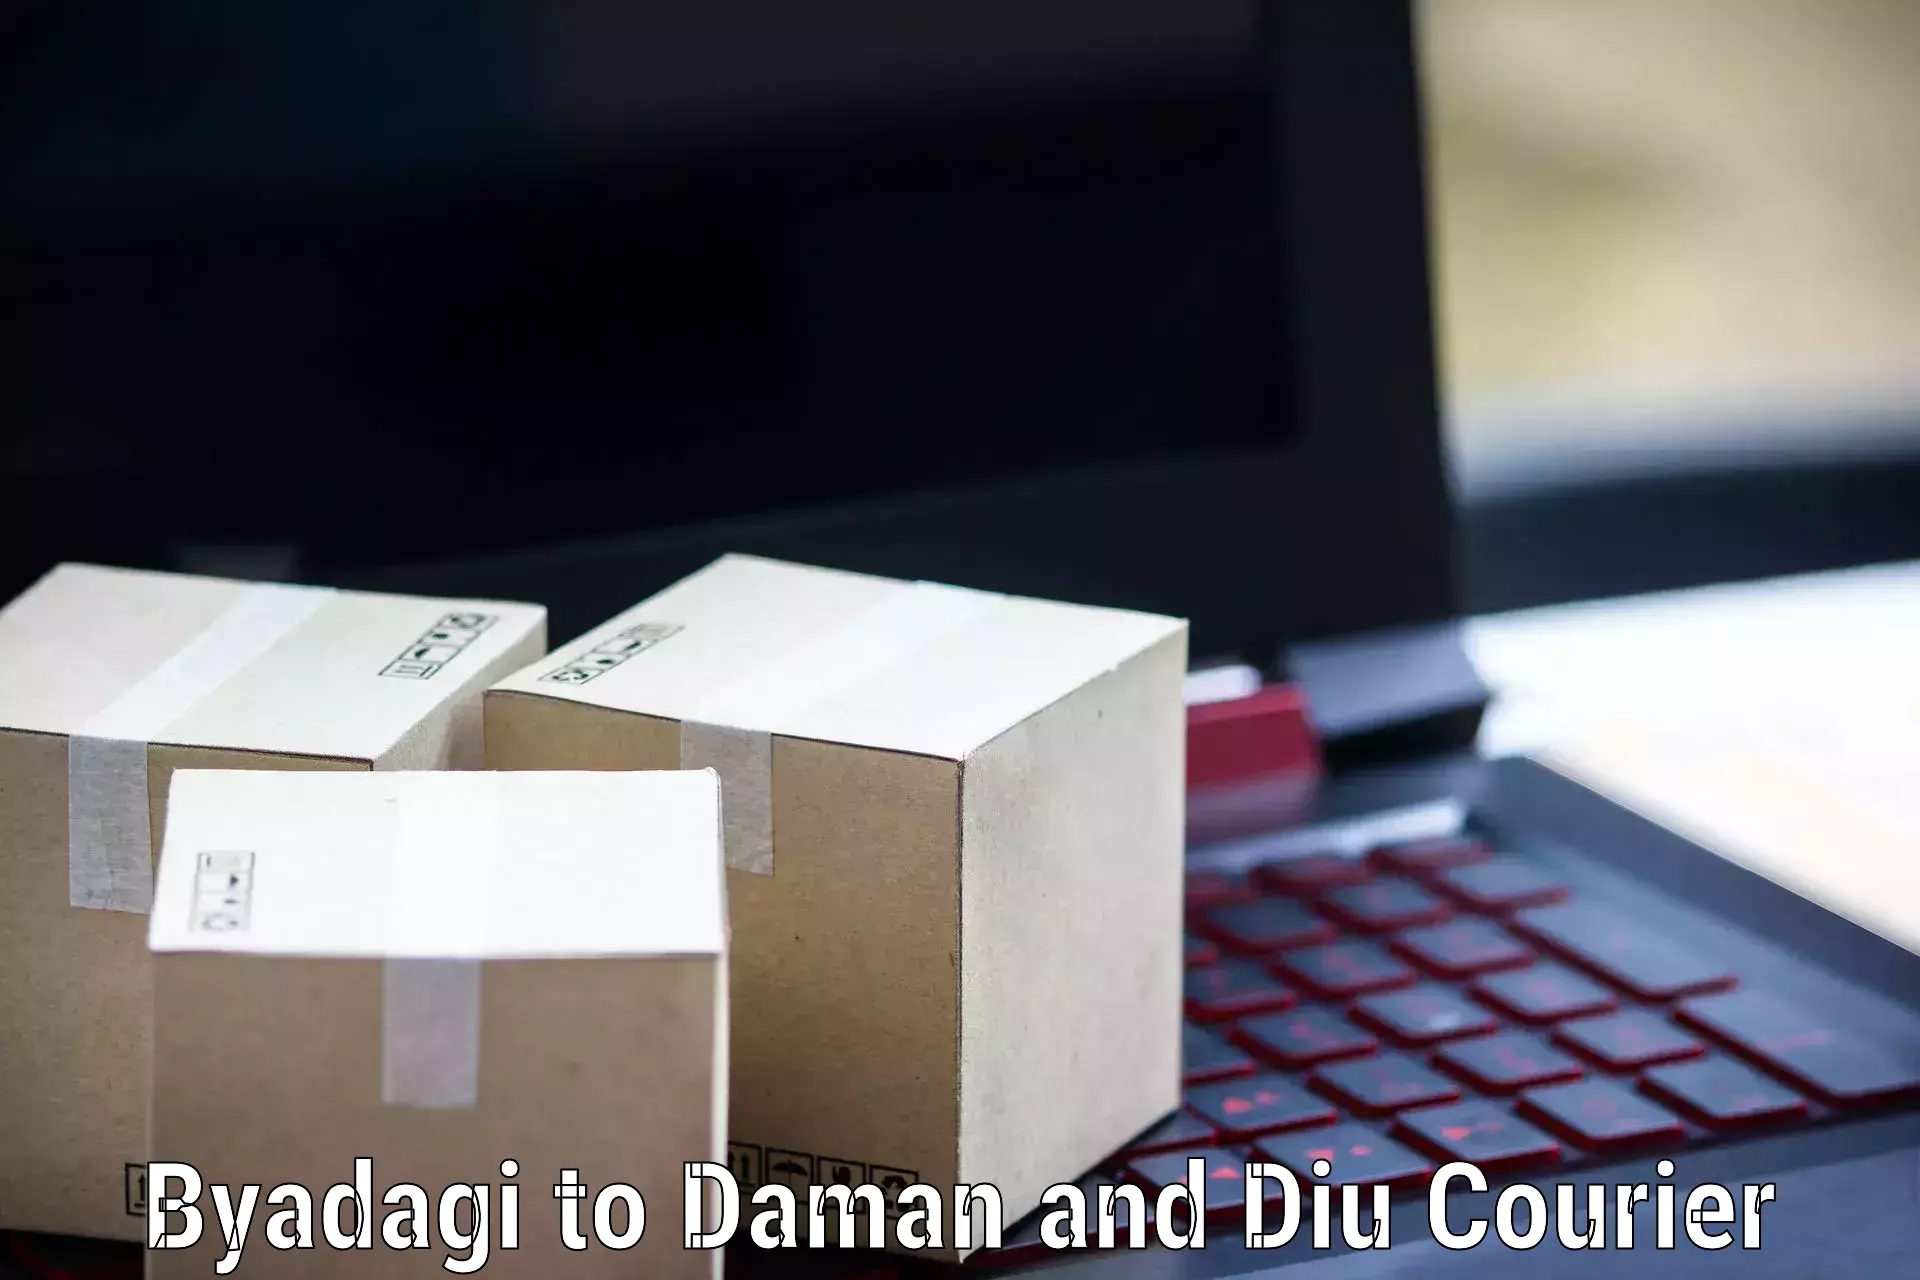 Global courier networks Byadagi to Daman and Diu